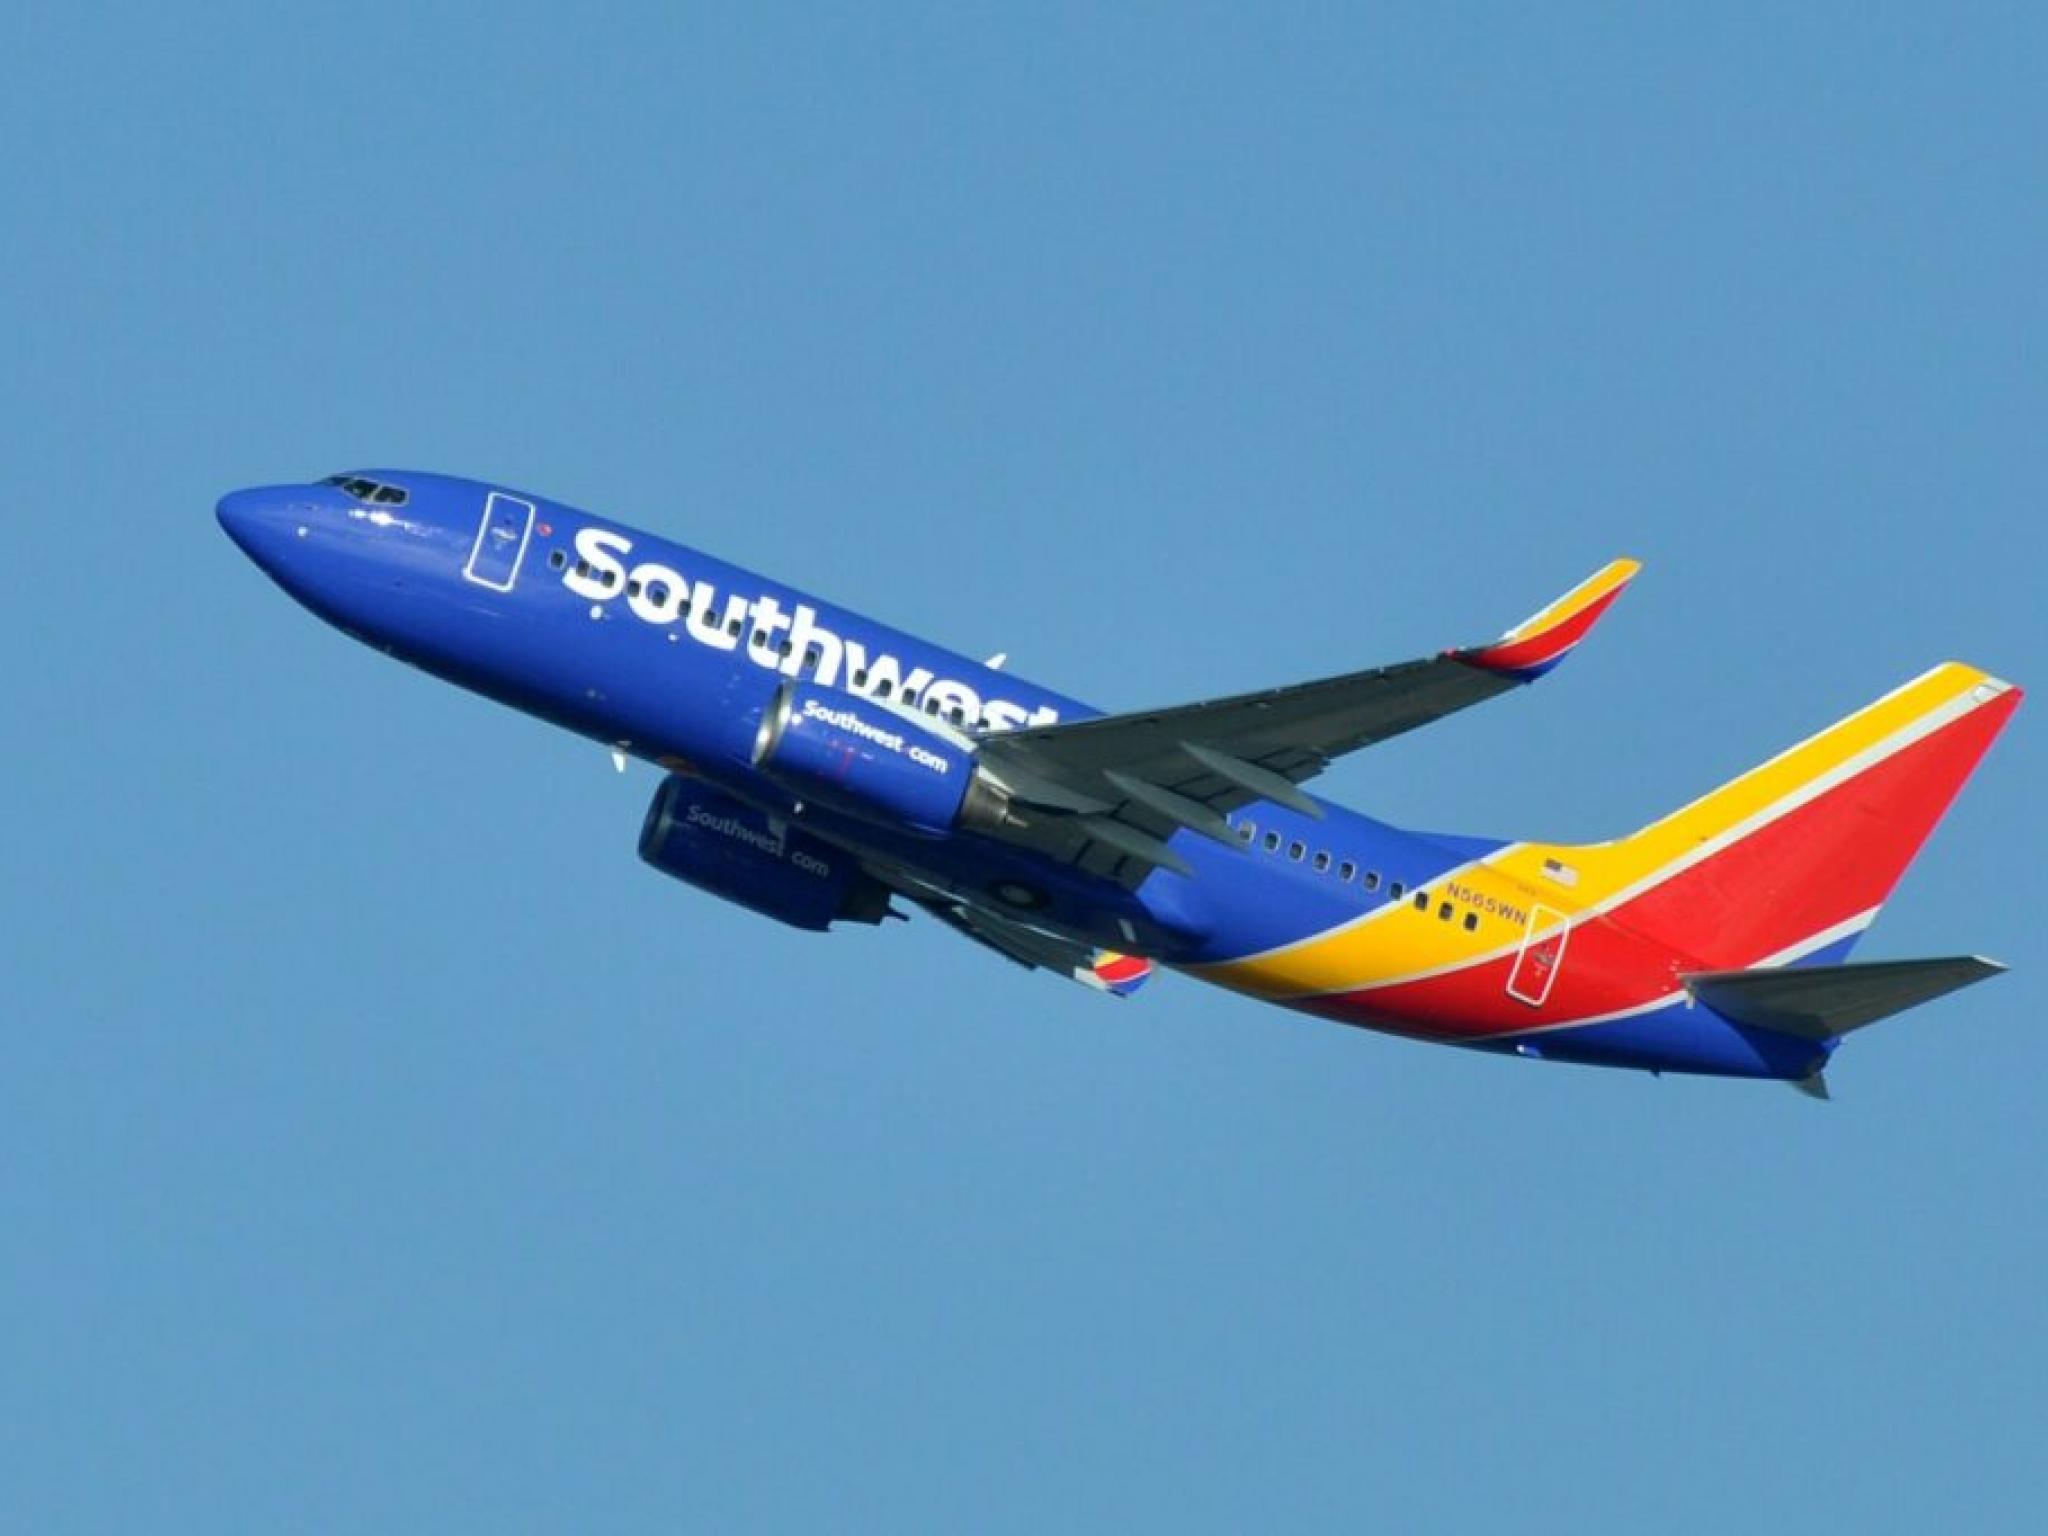  southwest-airlines-boeing-737-max-encounters-dutch-roll-mid-flight-prompting-faa-investigation 